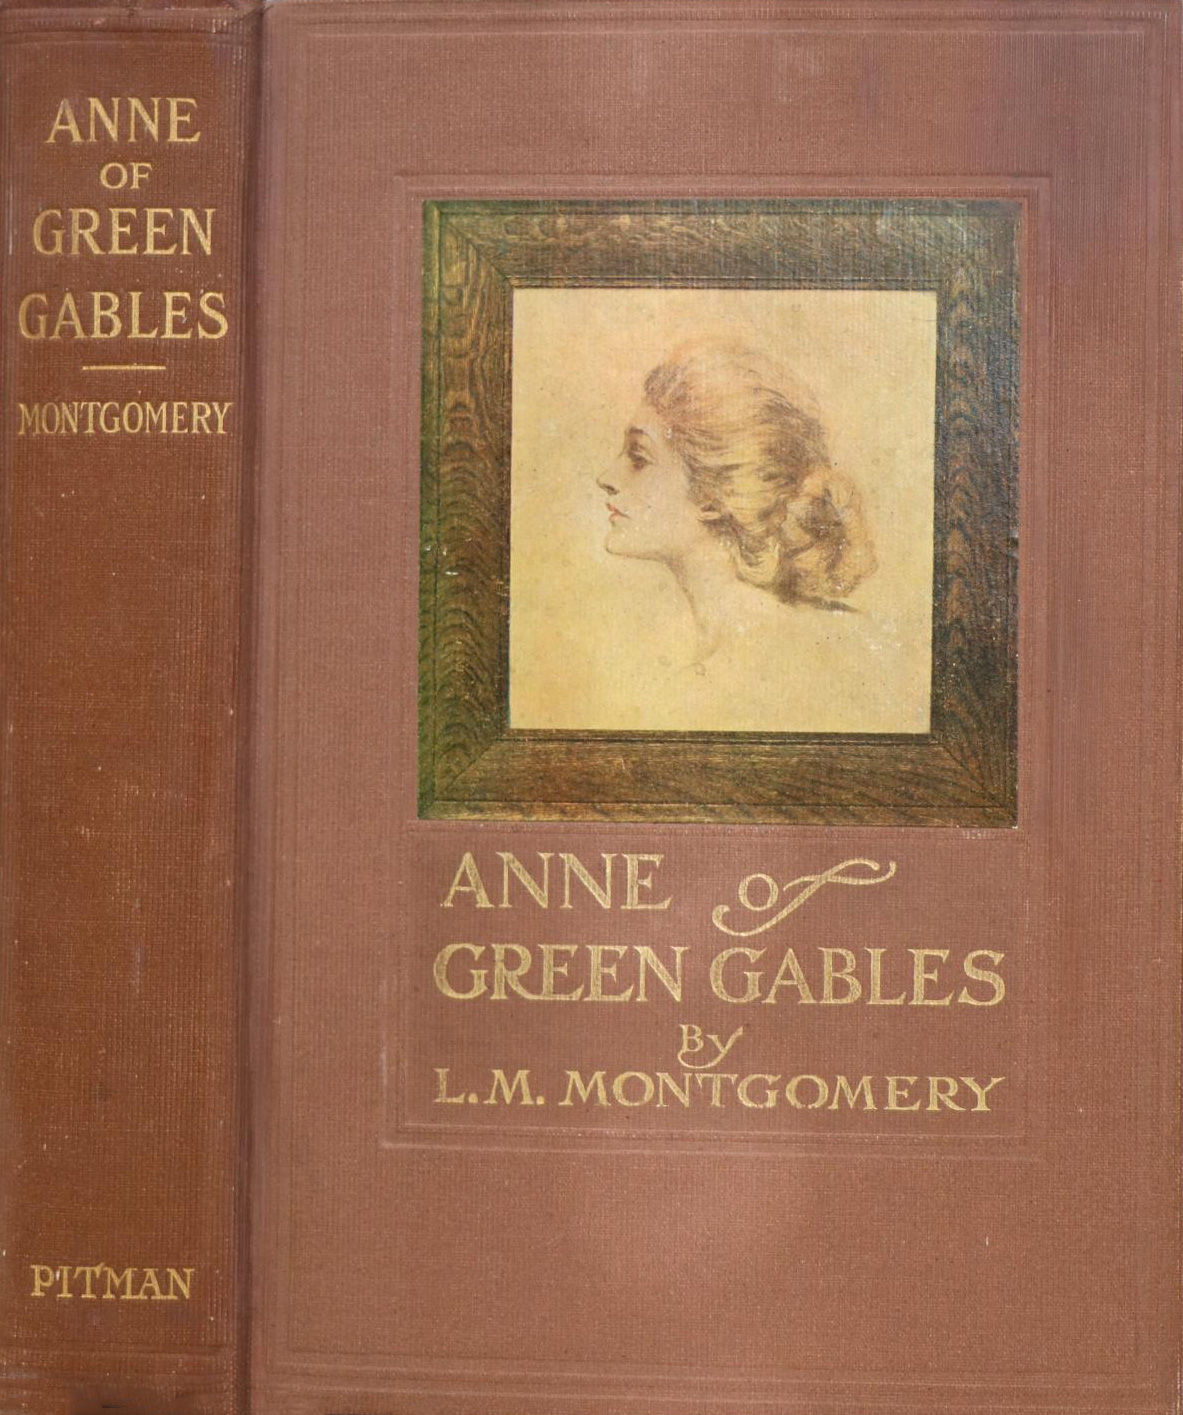 Anne of Green Gables | Project Gutenberg